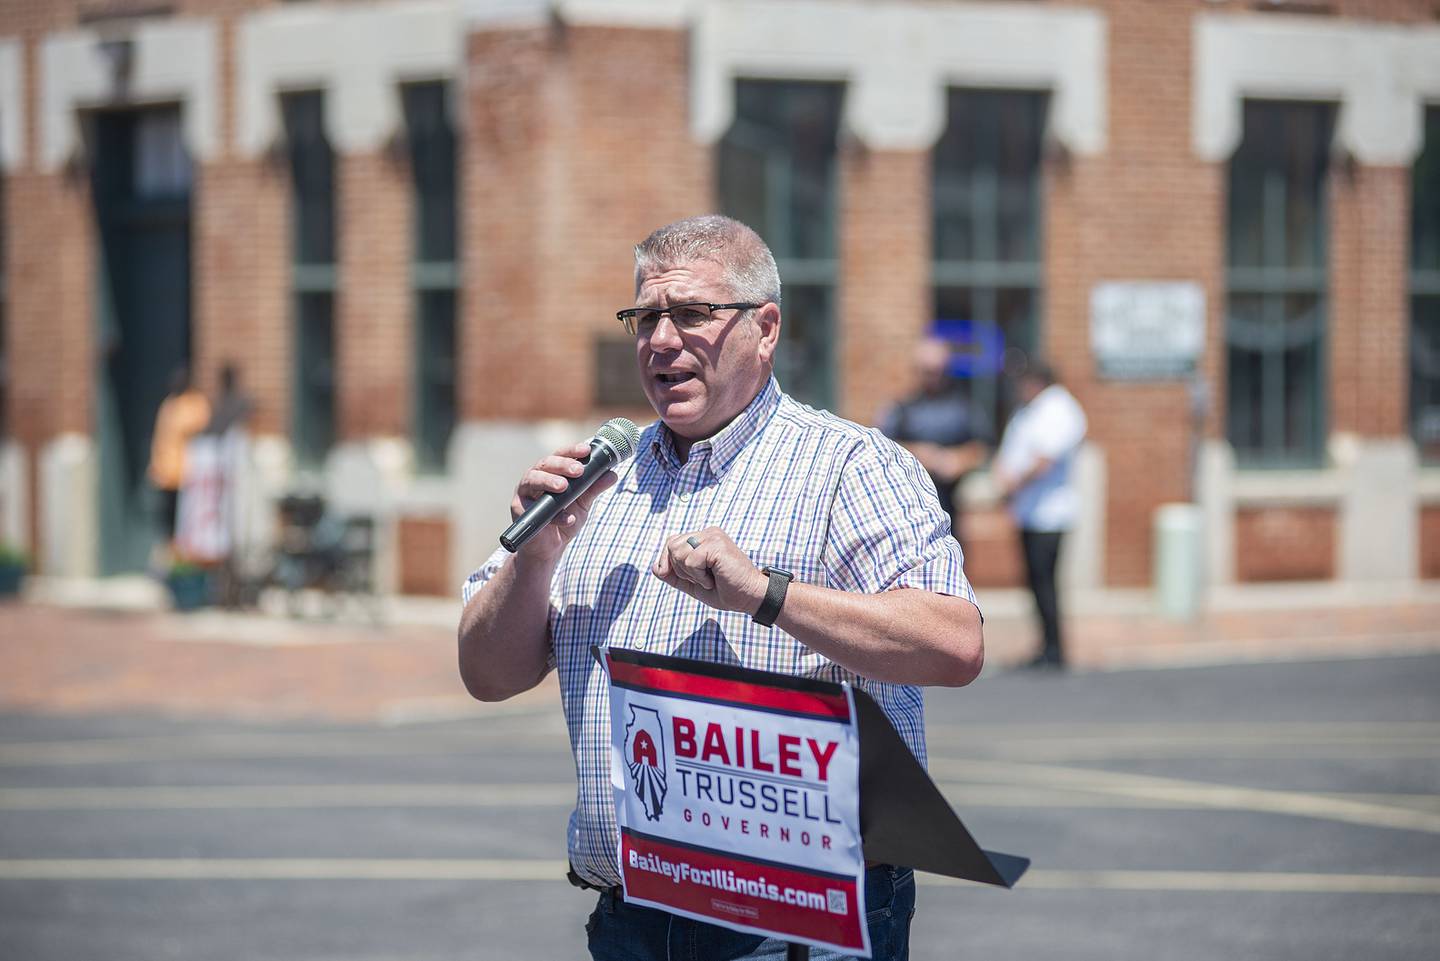 Gubernatorial candidate Darren Bailey speaks to a crowd in Amboy Friday, June 17, 2022 as he makes a campaign trip across northern Illinois. Bailey is on the republican ticket for this month’s primary.